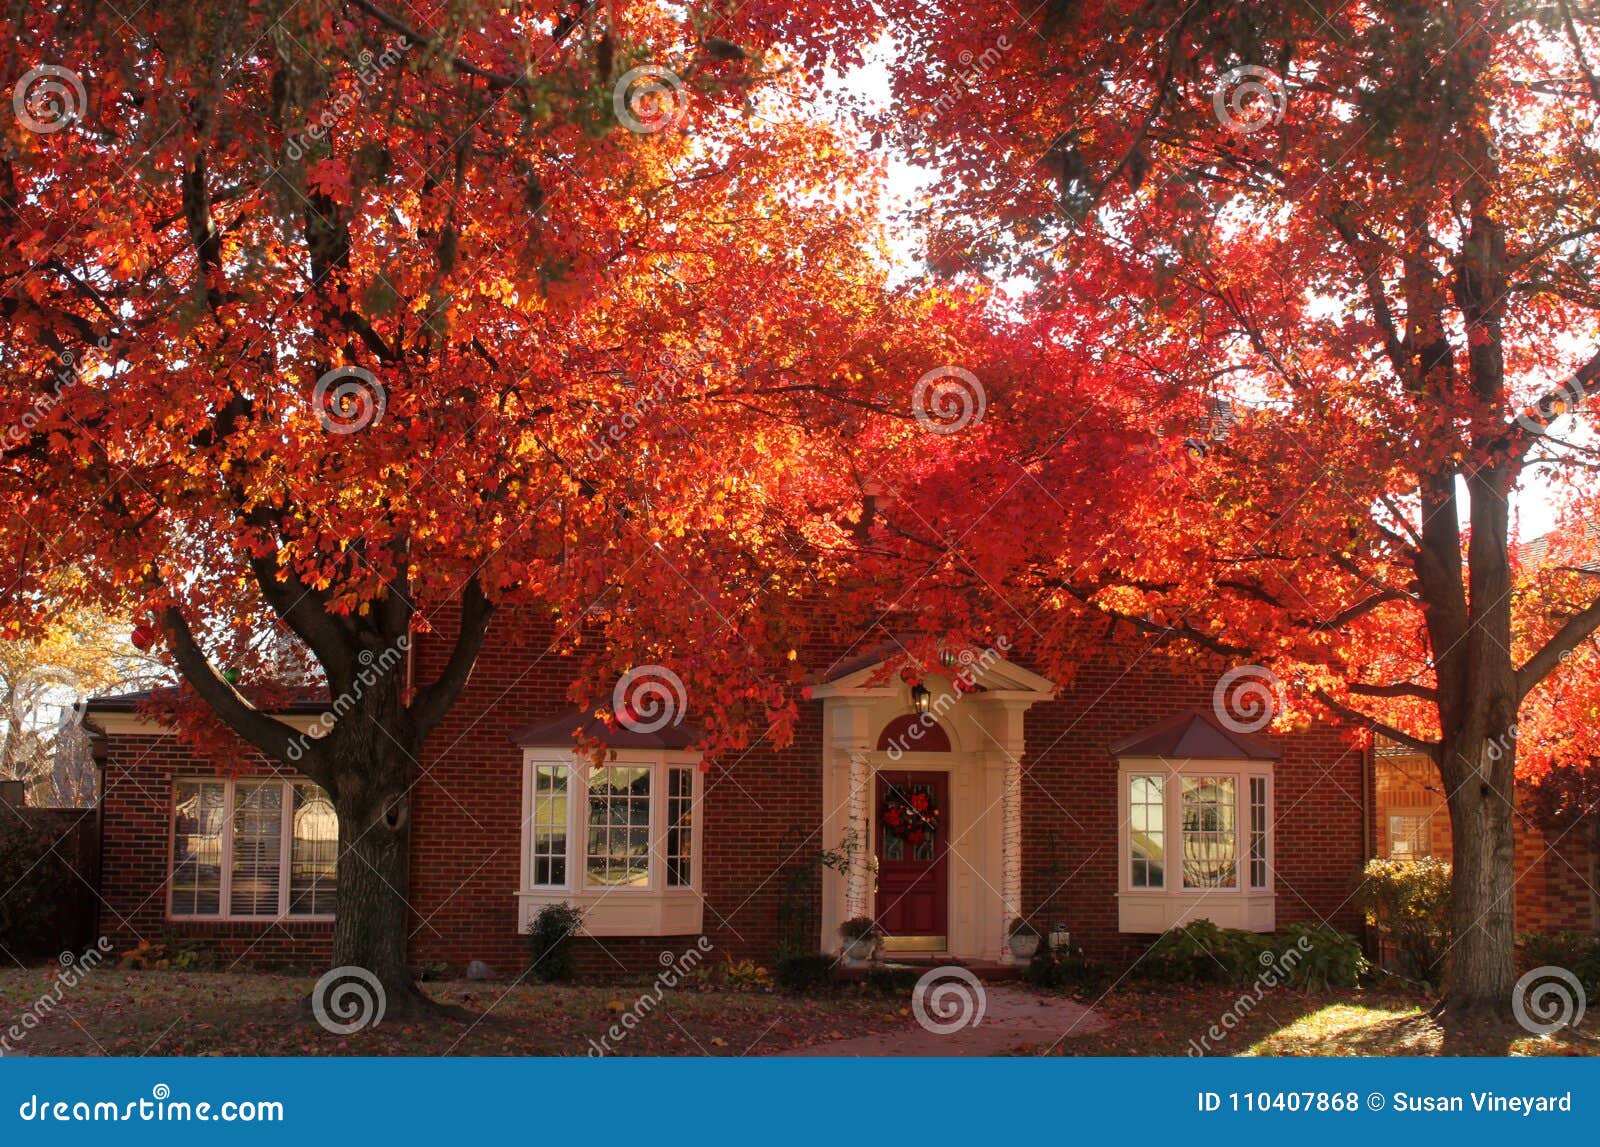 sun shining through brilliant red leaves shading a beautiful traditional brick house with christmas decorations all ready up